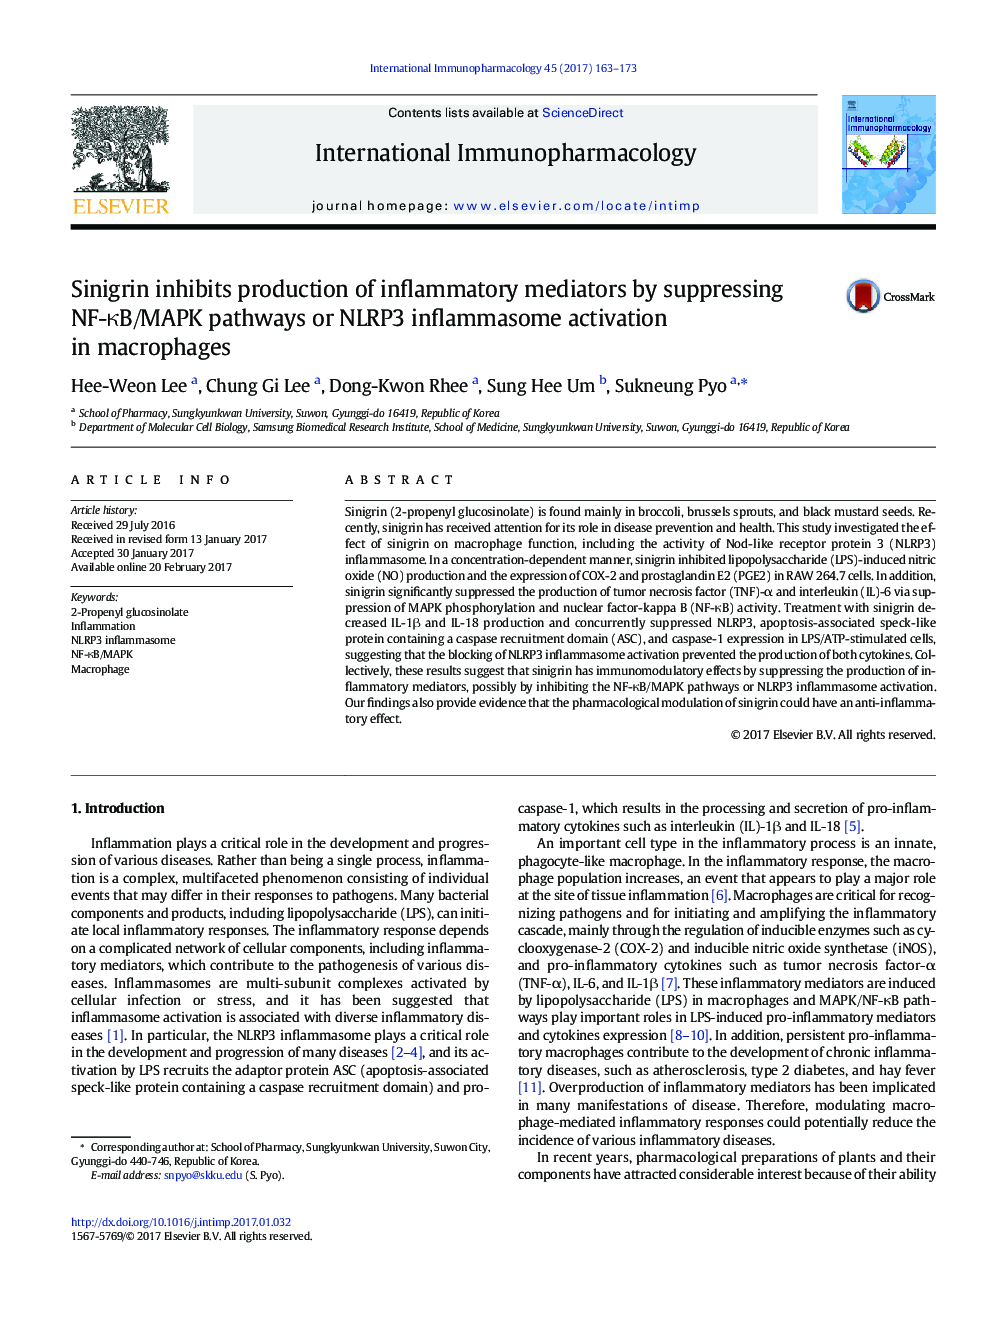 Sinigrin inhibits production of inflammatory mediators by suppressing NF-ÎºB/MAPK pathways or NLRP3 inflammasome activation in macrophages